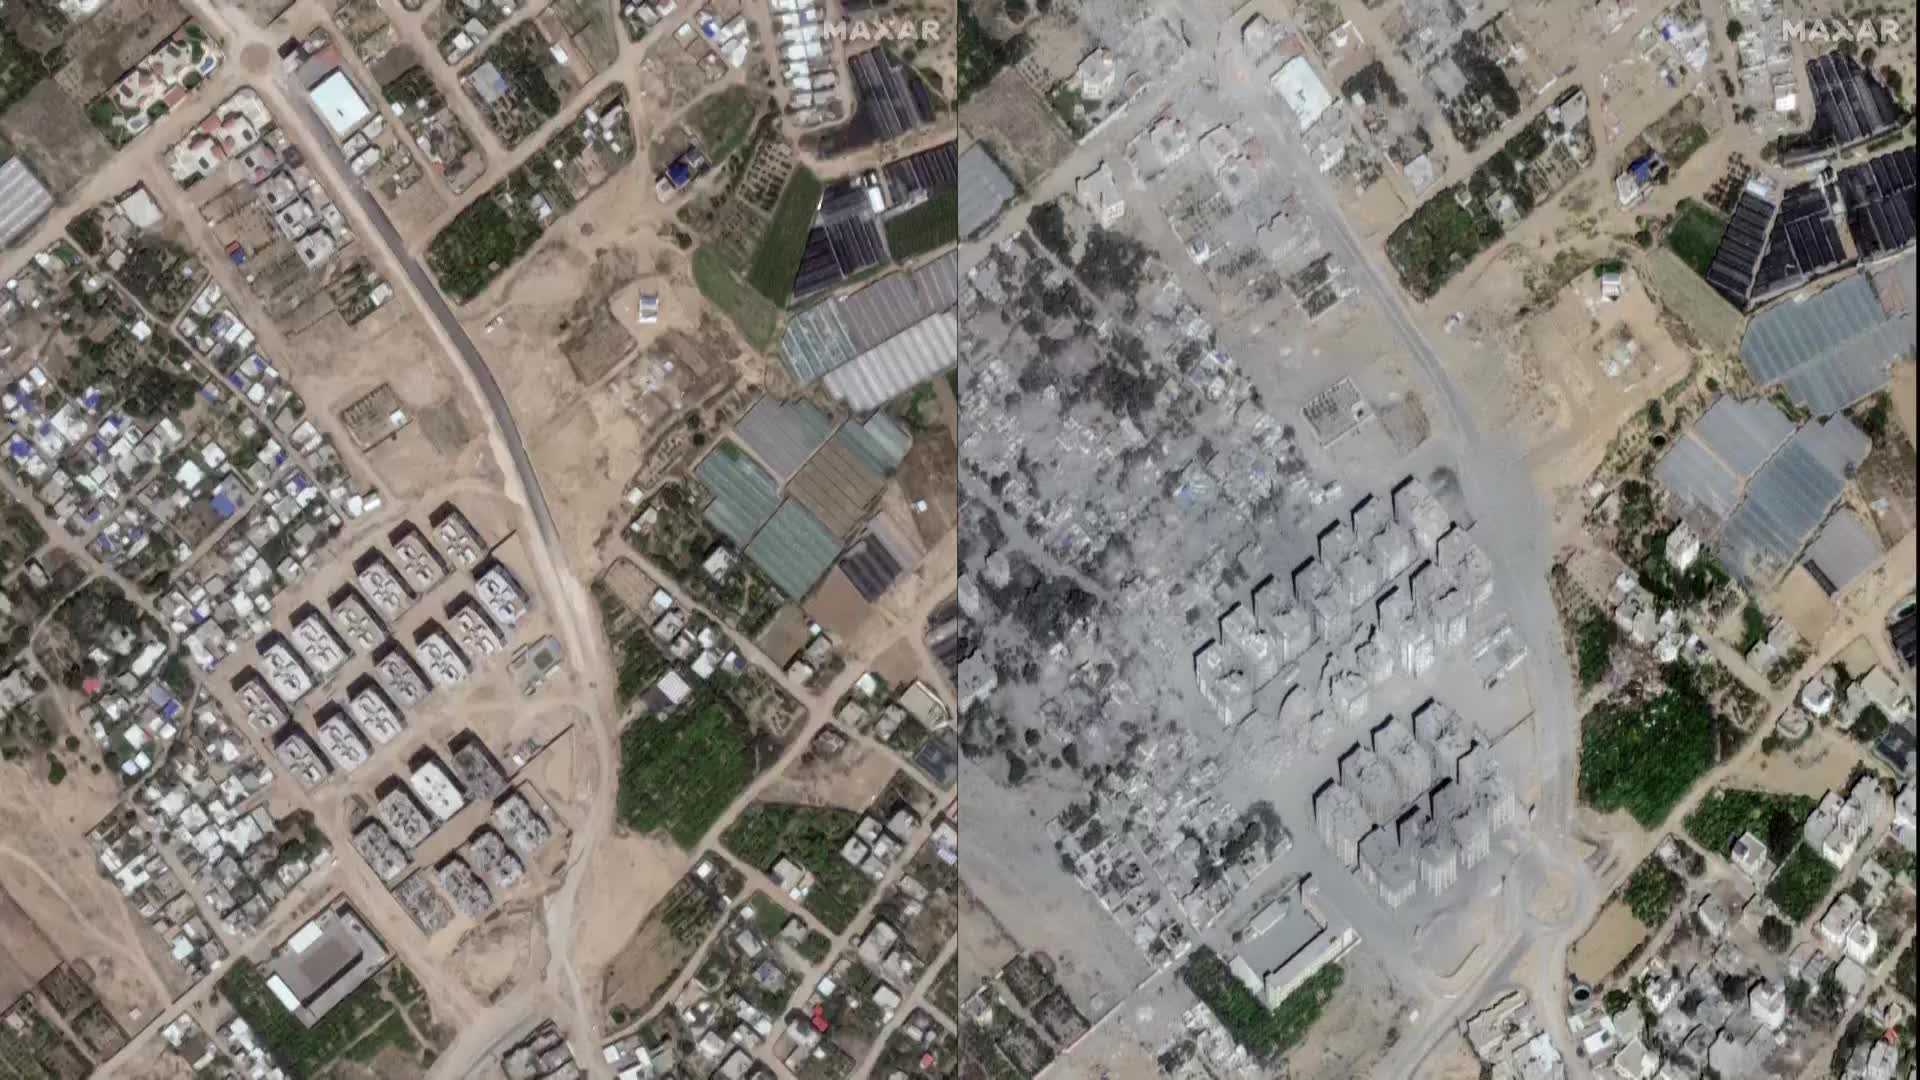 Before-and-after satellite images show destruction of candle factory